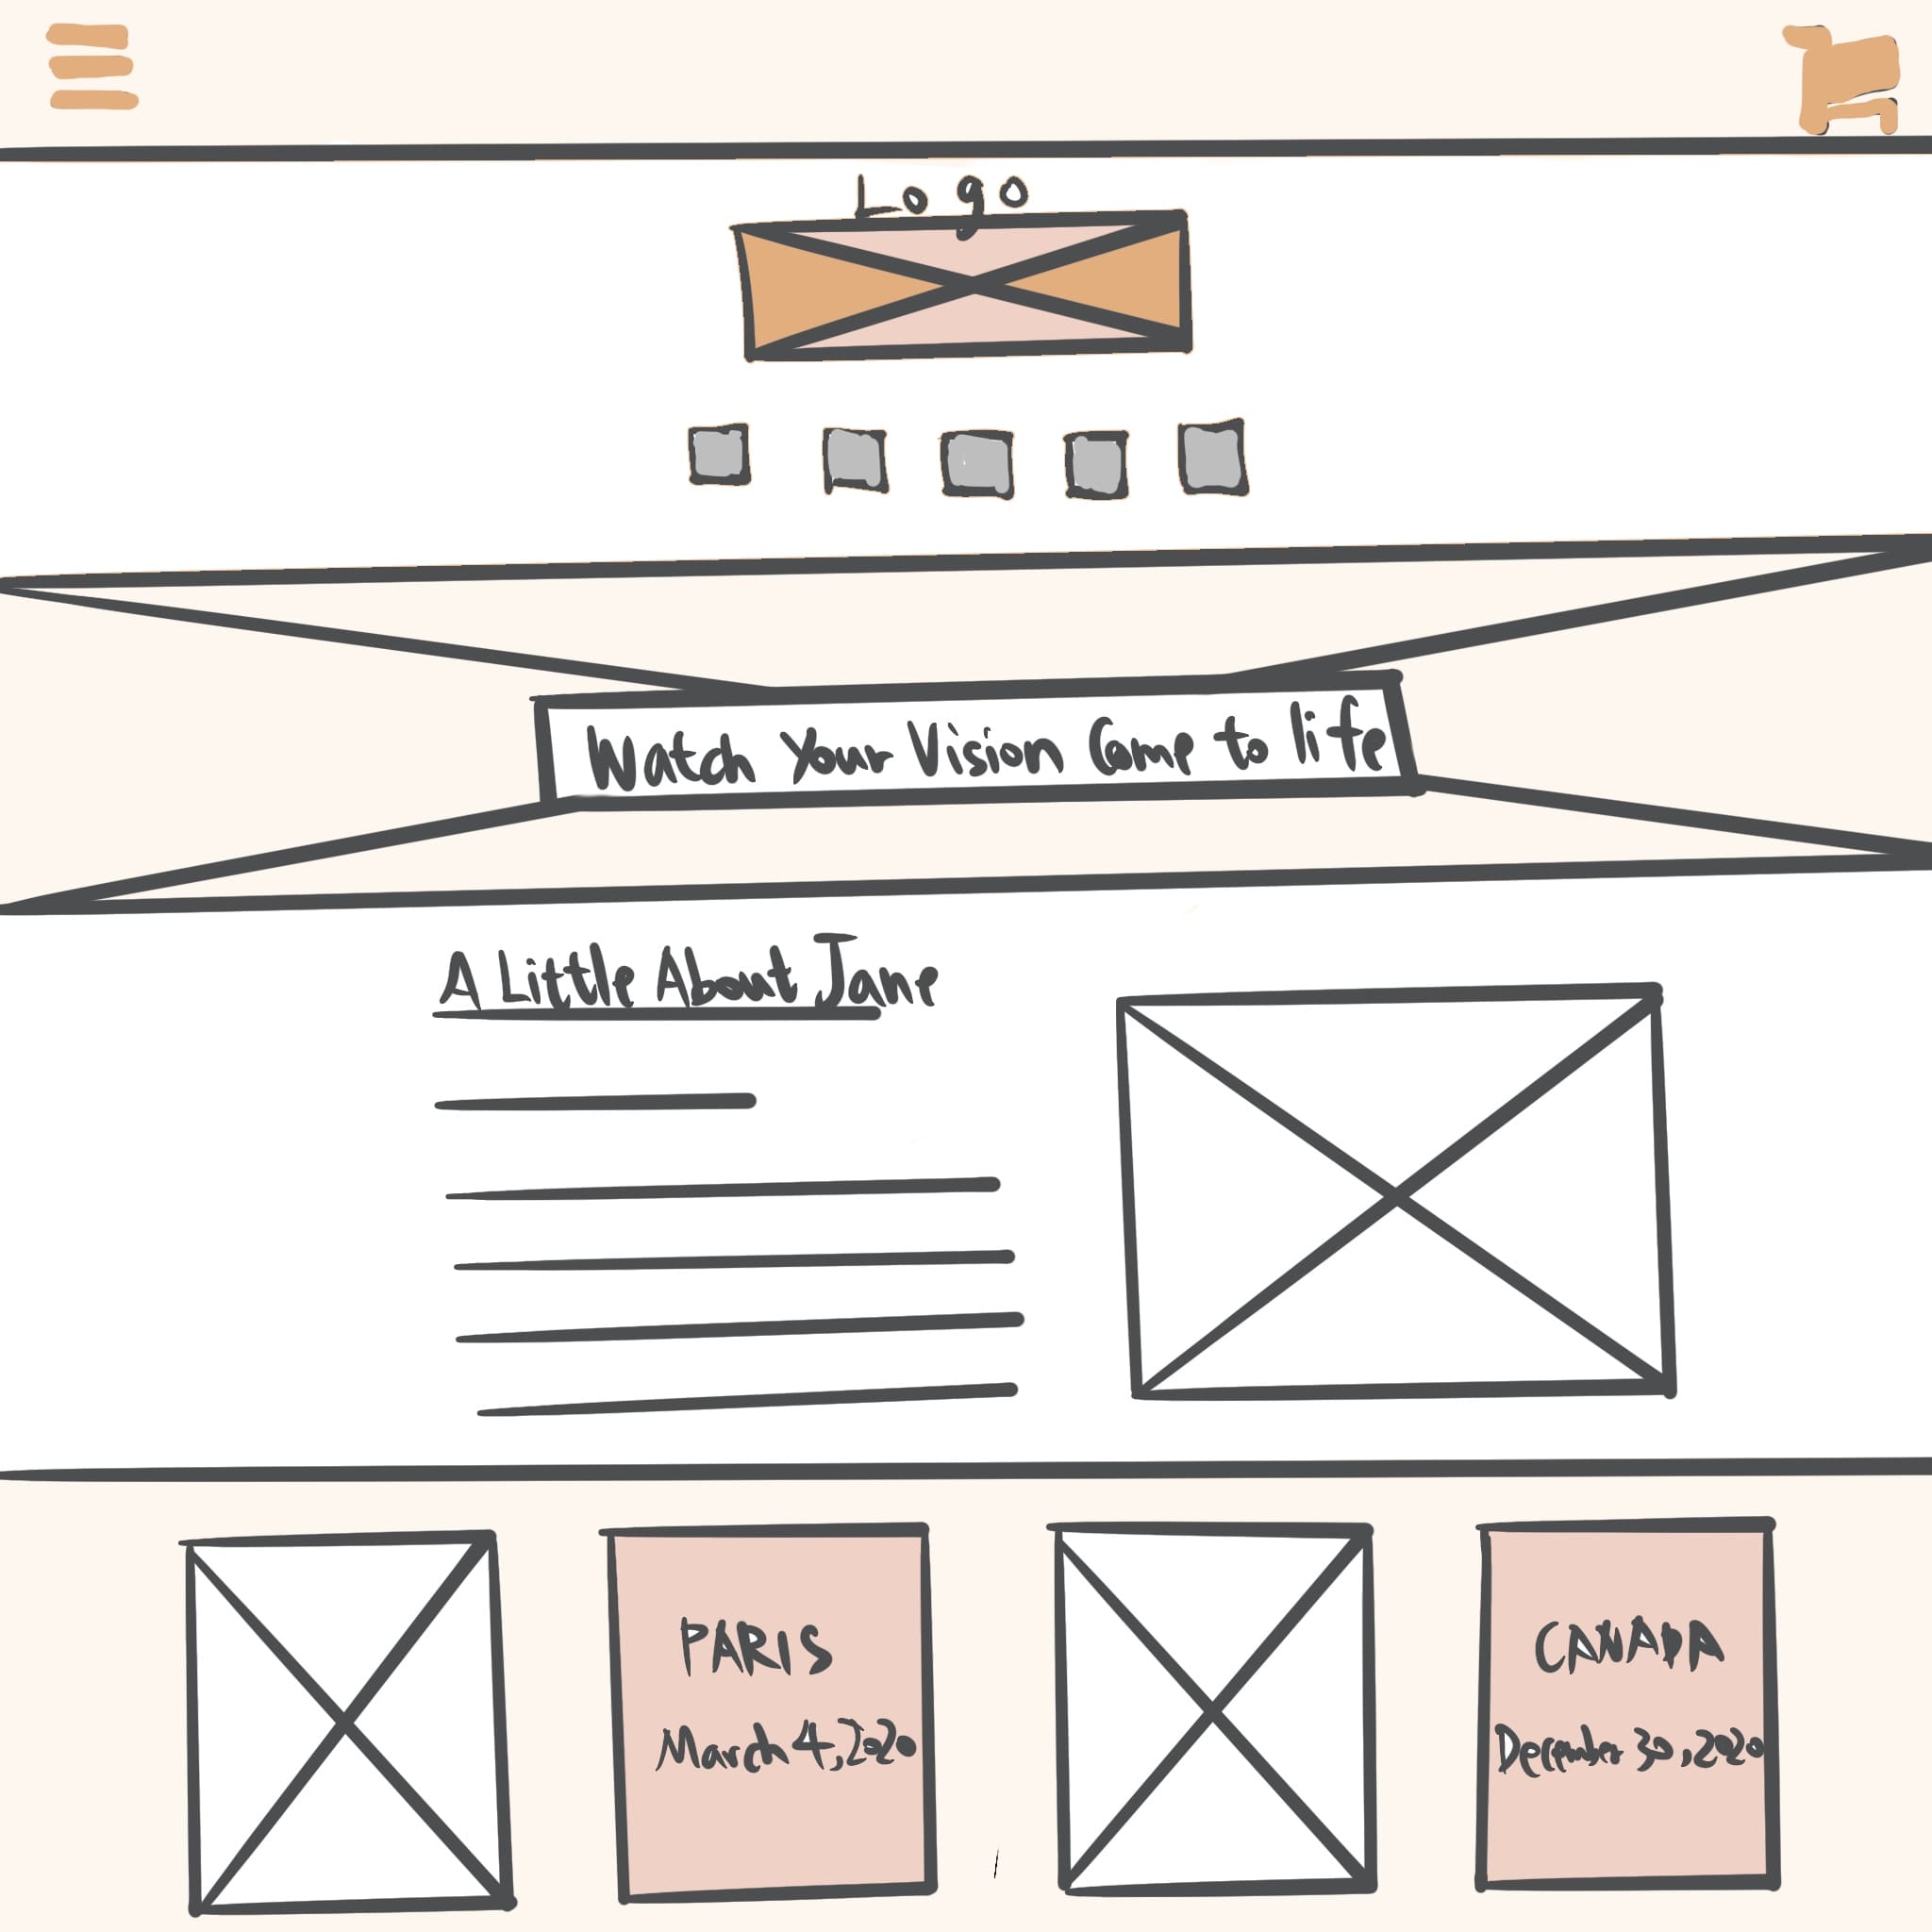 wireframes of the website homepage